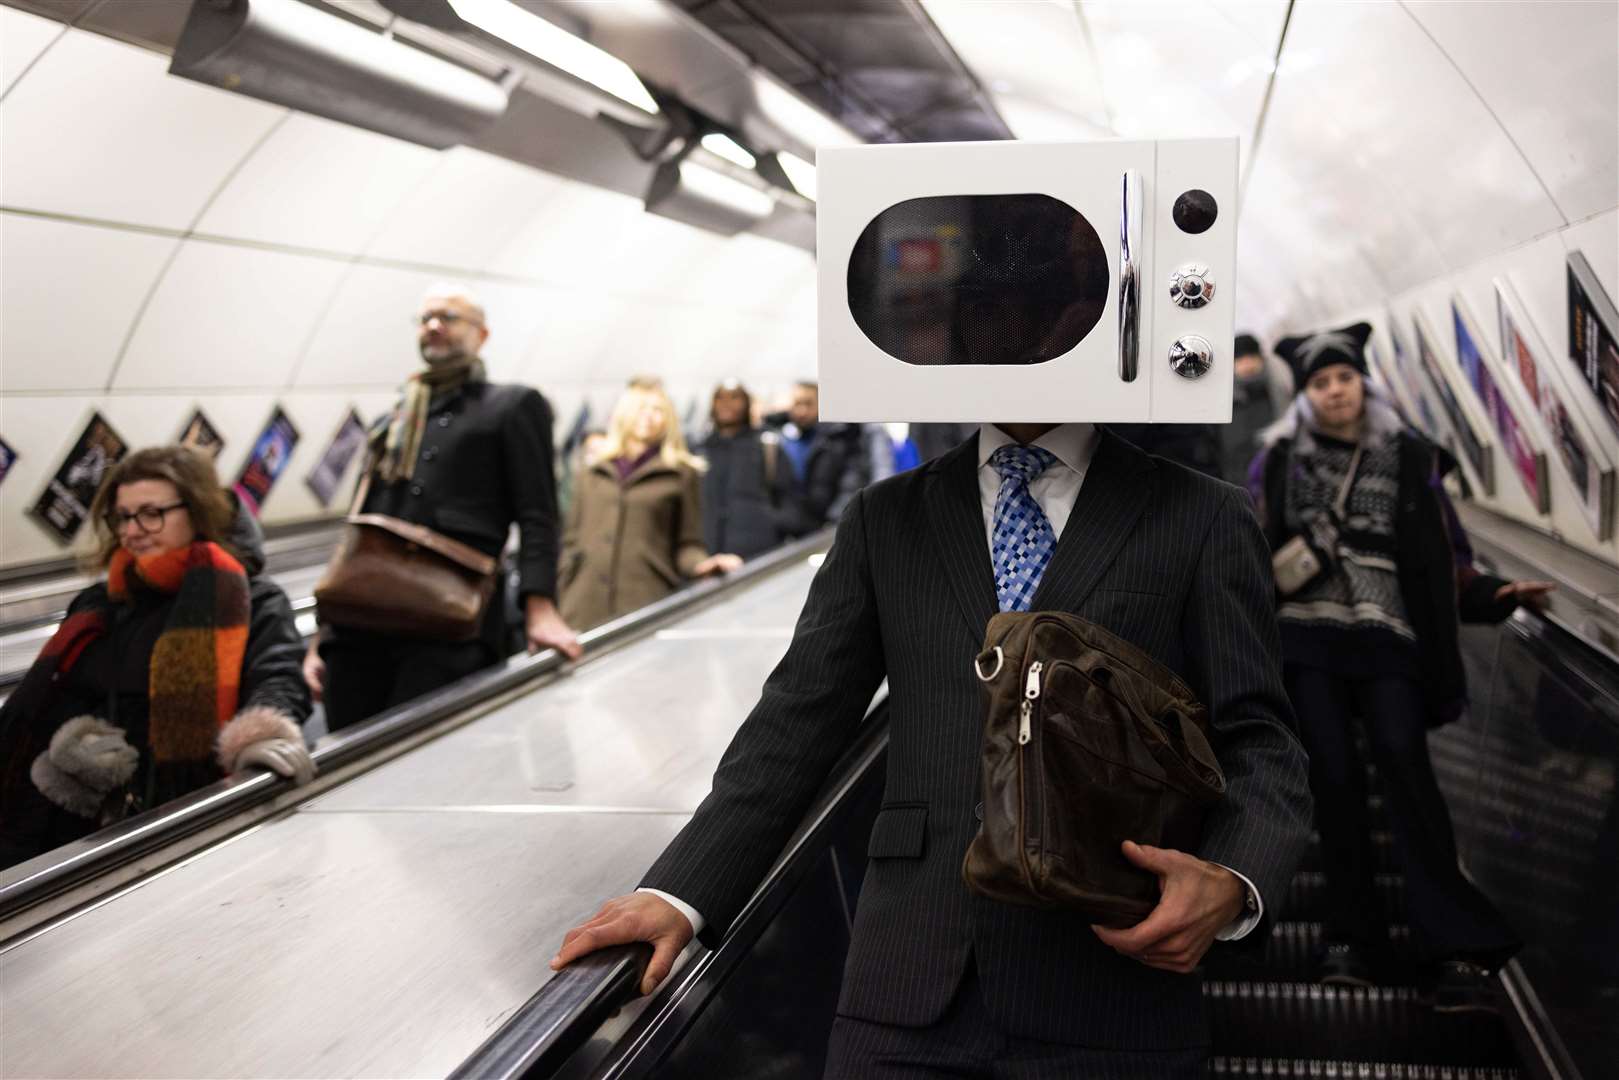 A man on the underground in London with a microwave on his head (David Parry/PA)